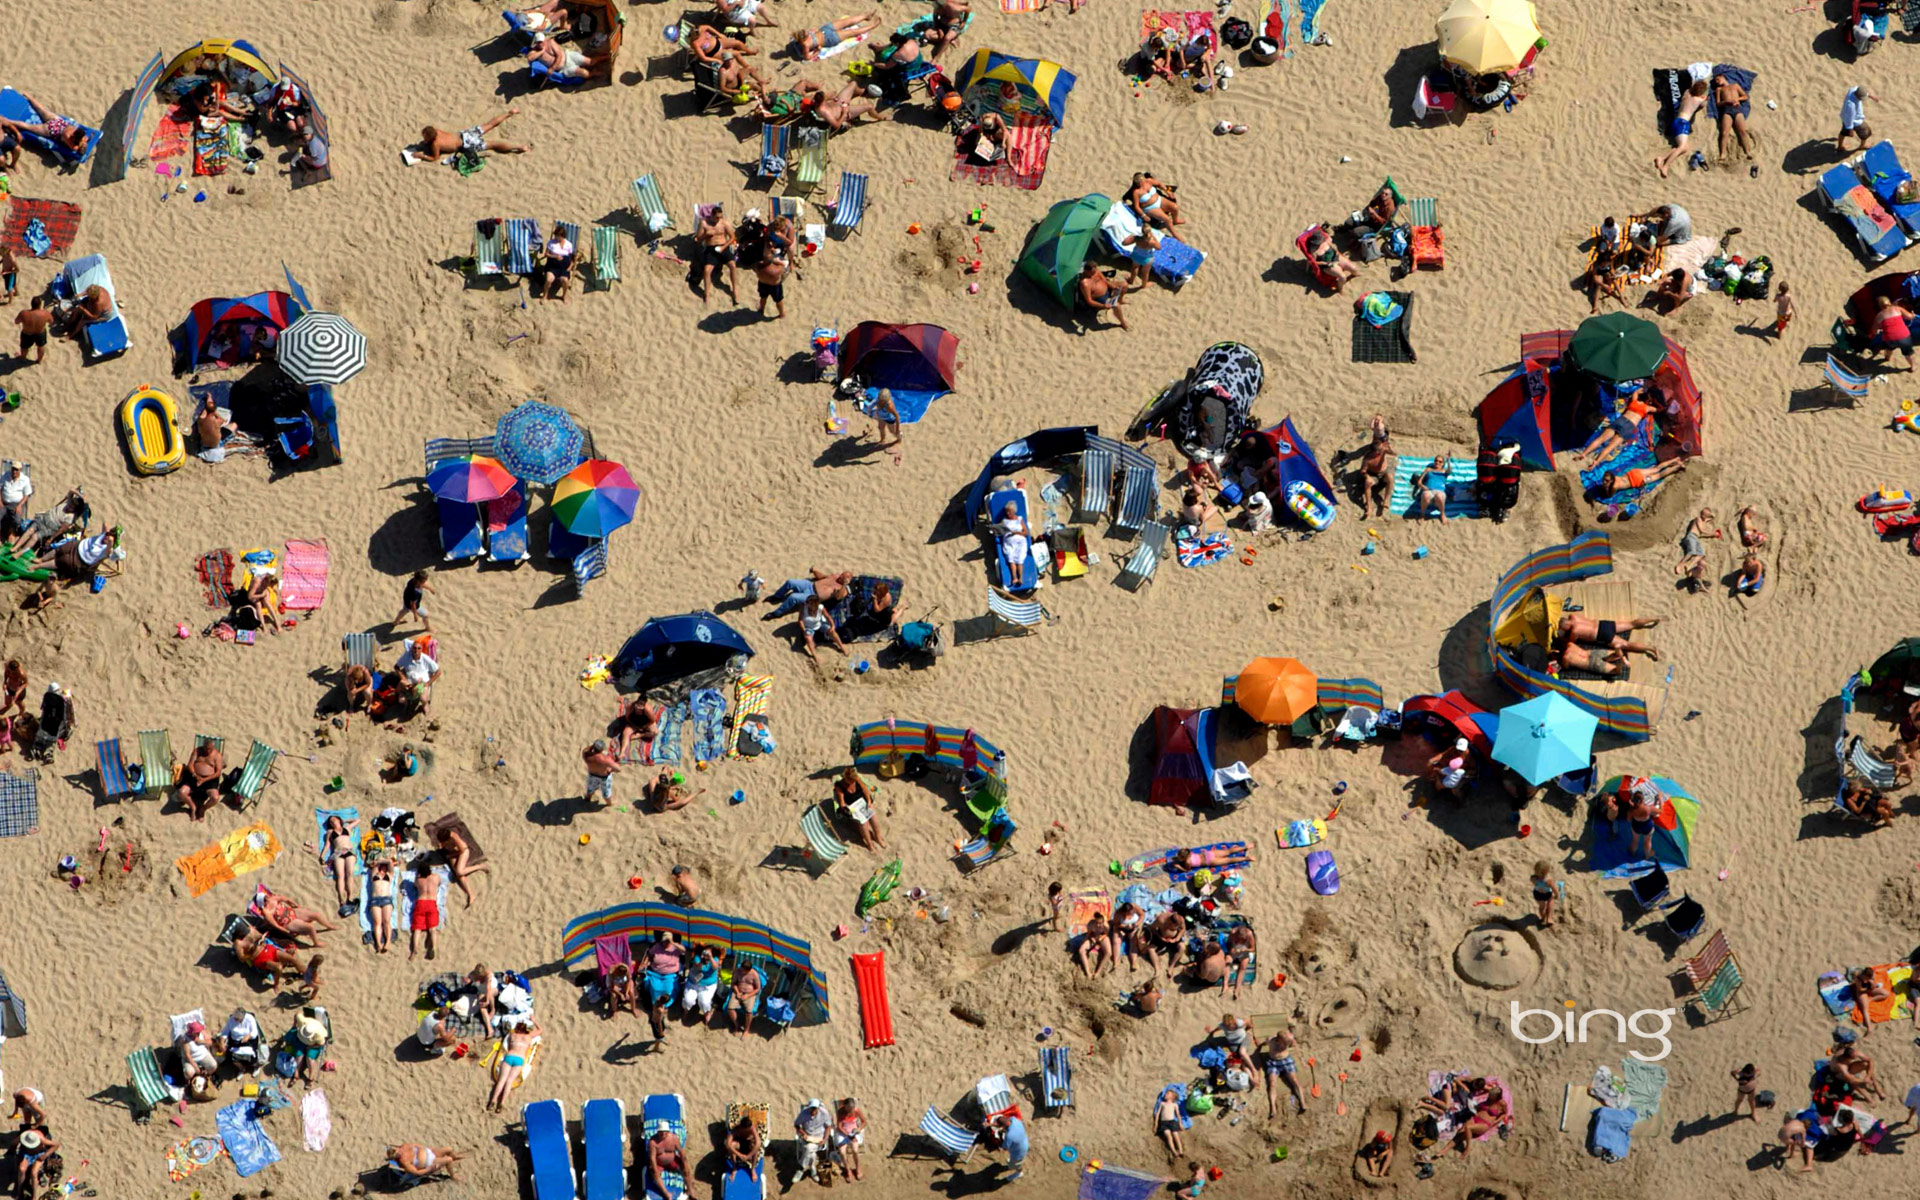 Crowds at Weymouth Beach in Dorset, England